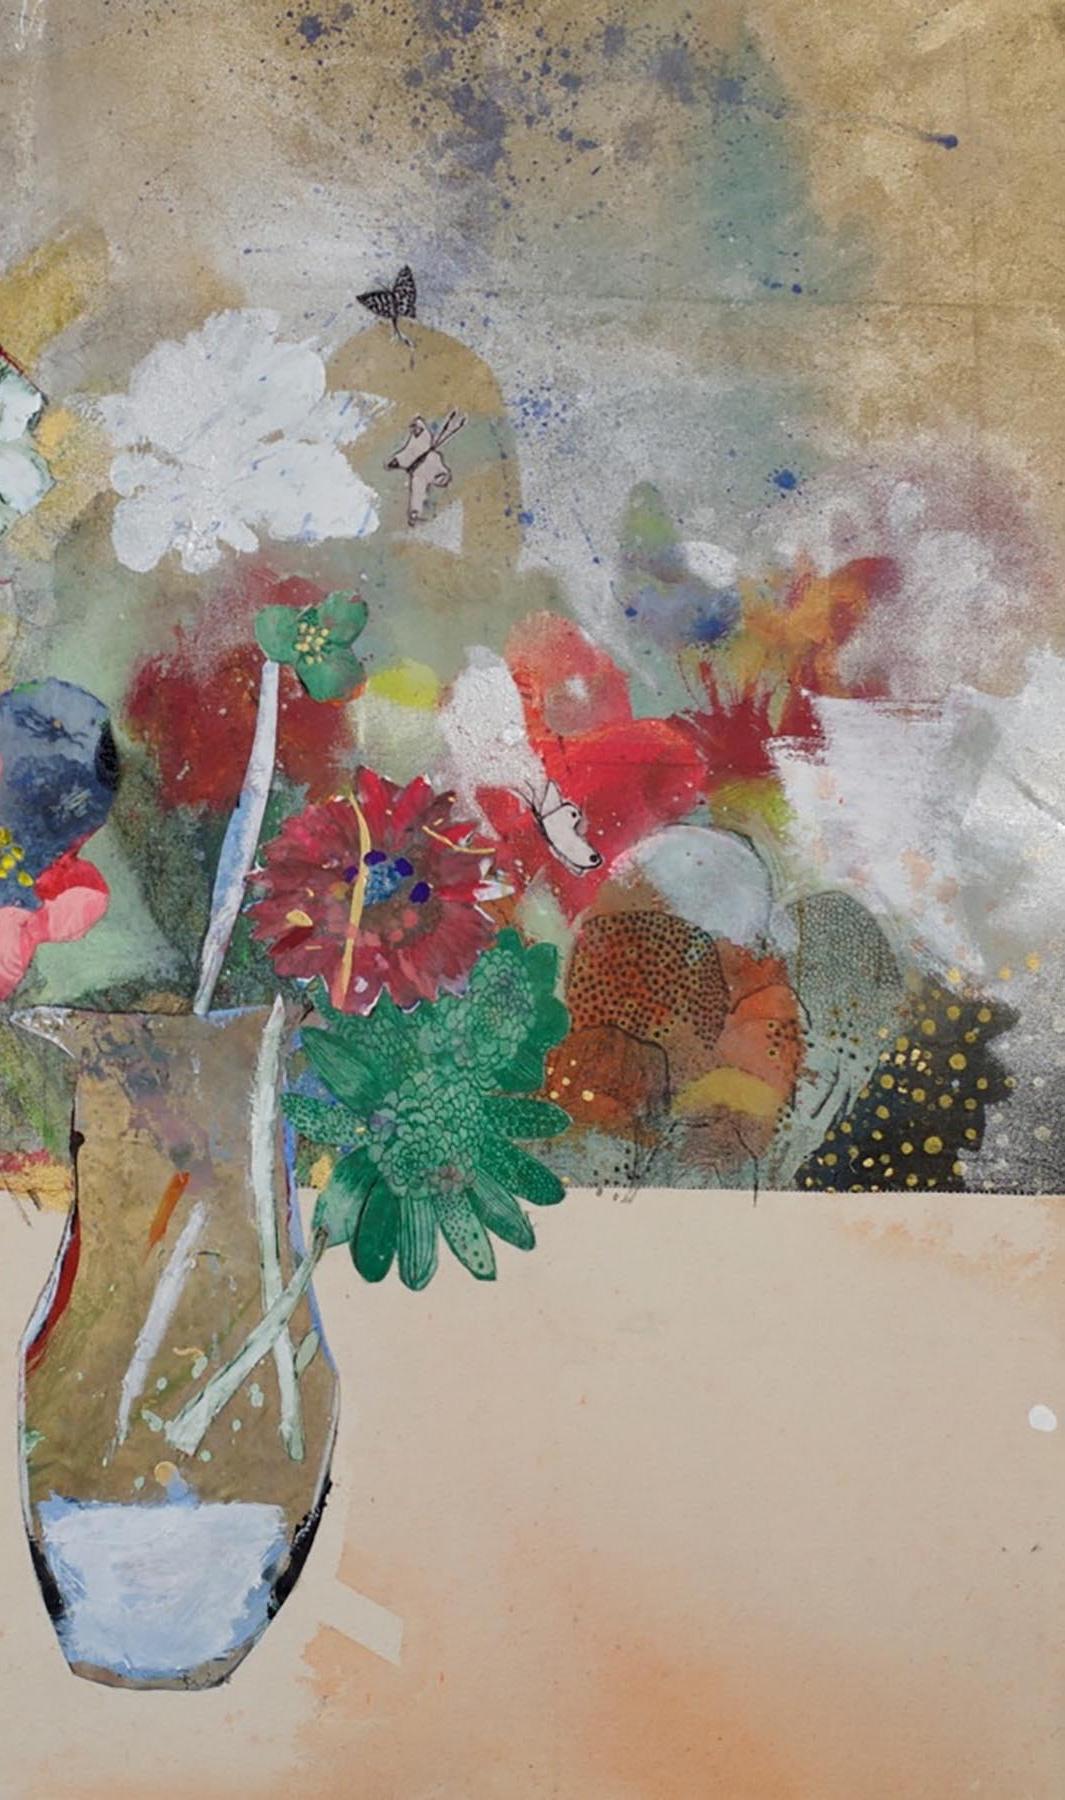 Homage to Redon - Painting by Fumiko Toda